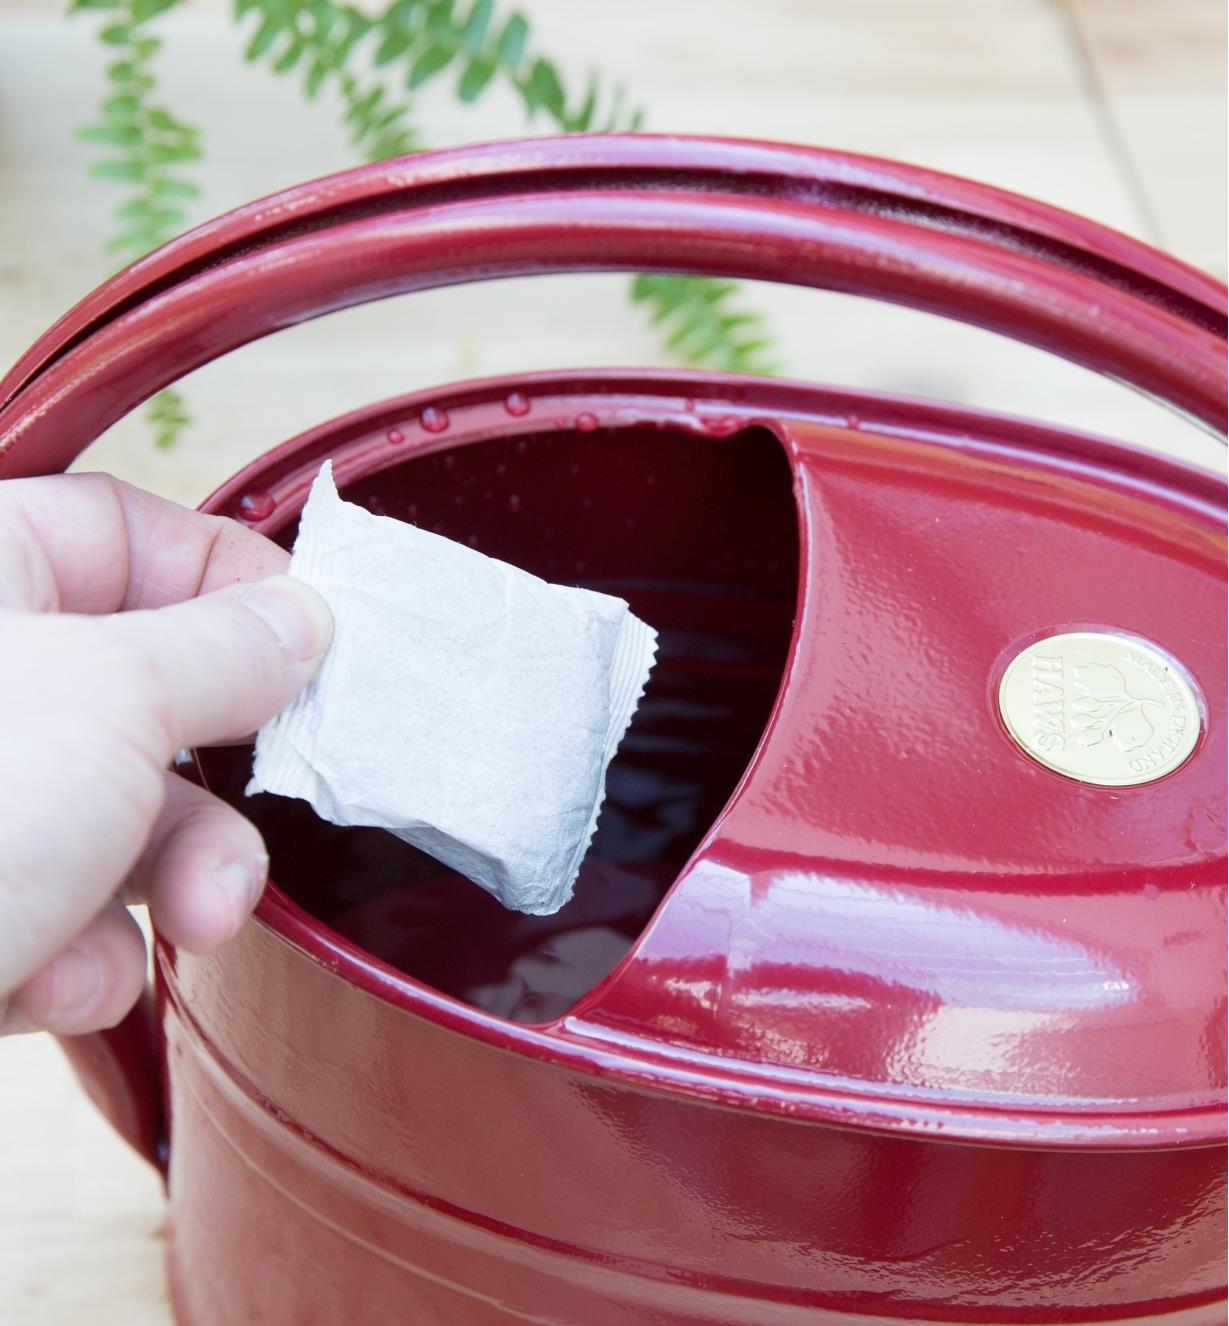 Placing a compost tea bag in a watering can